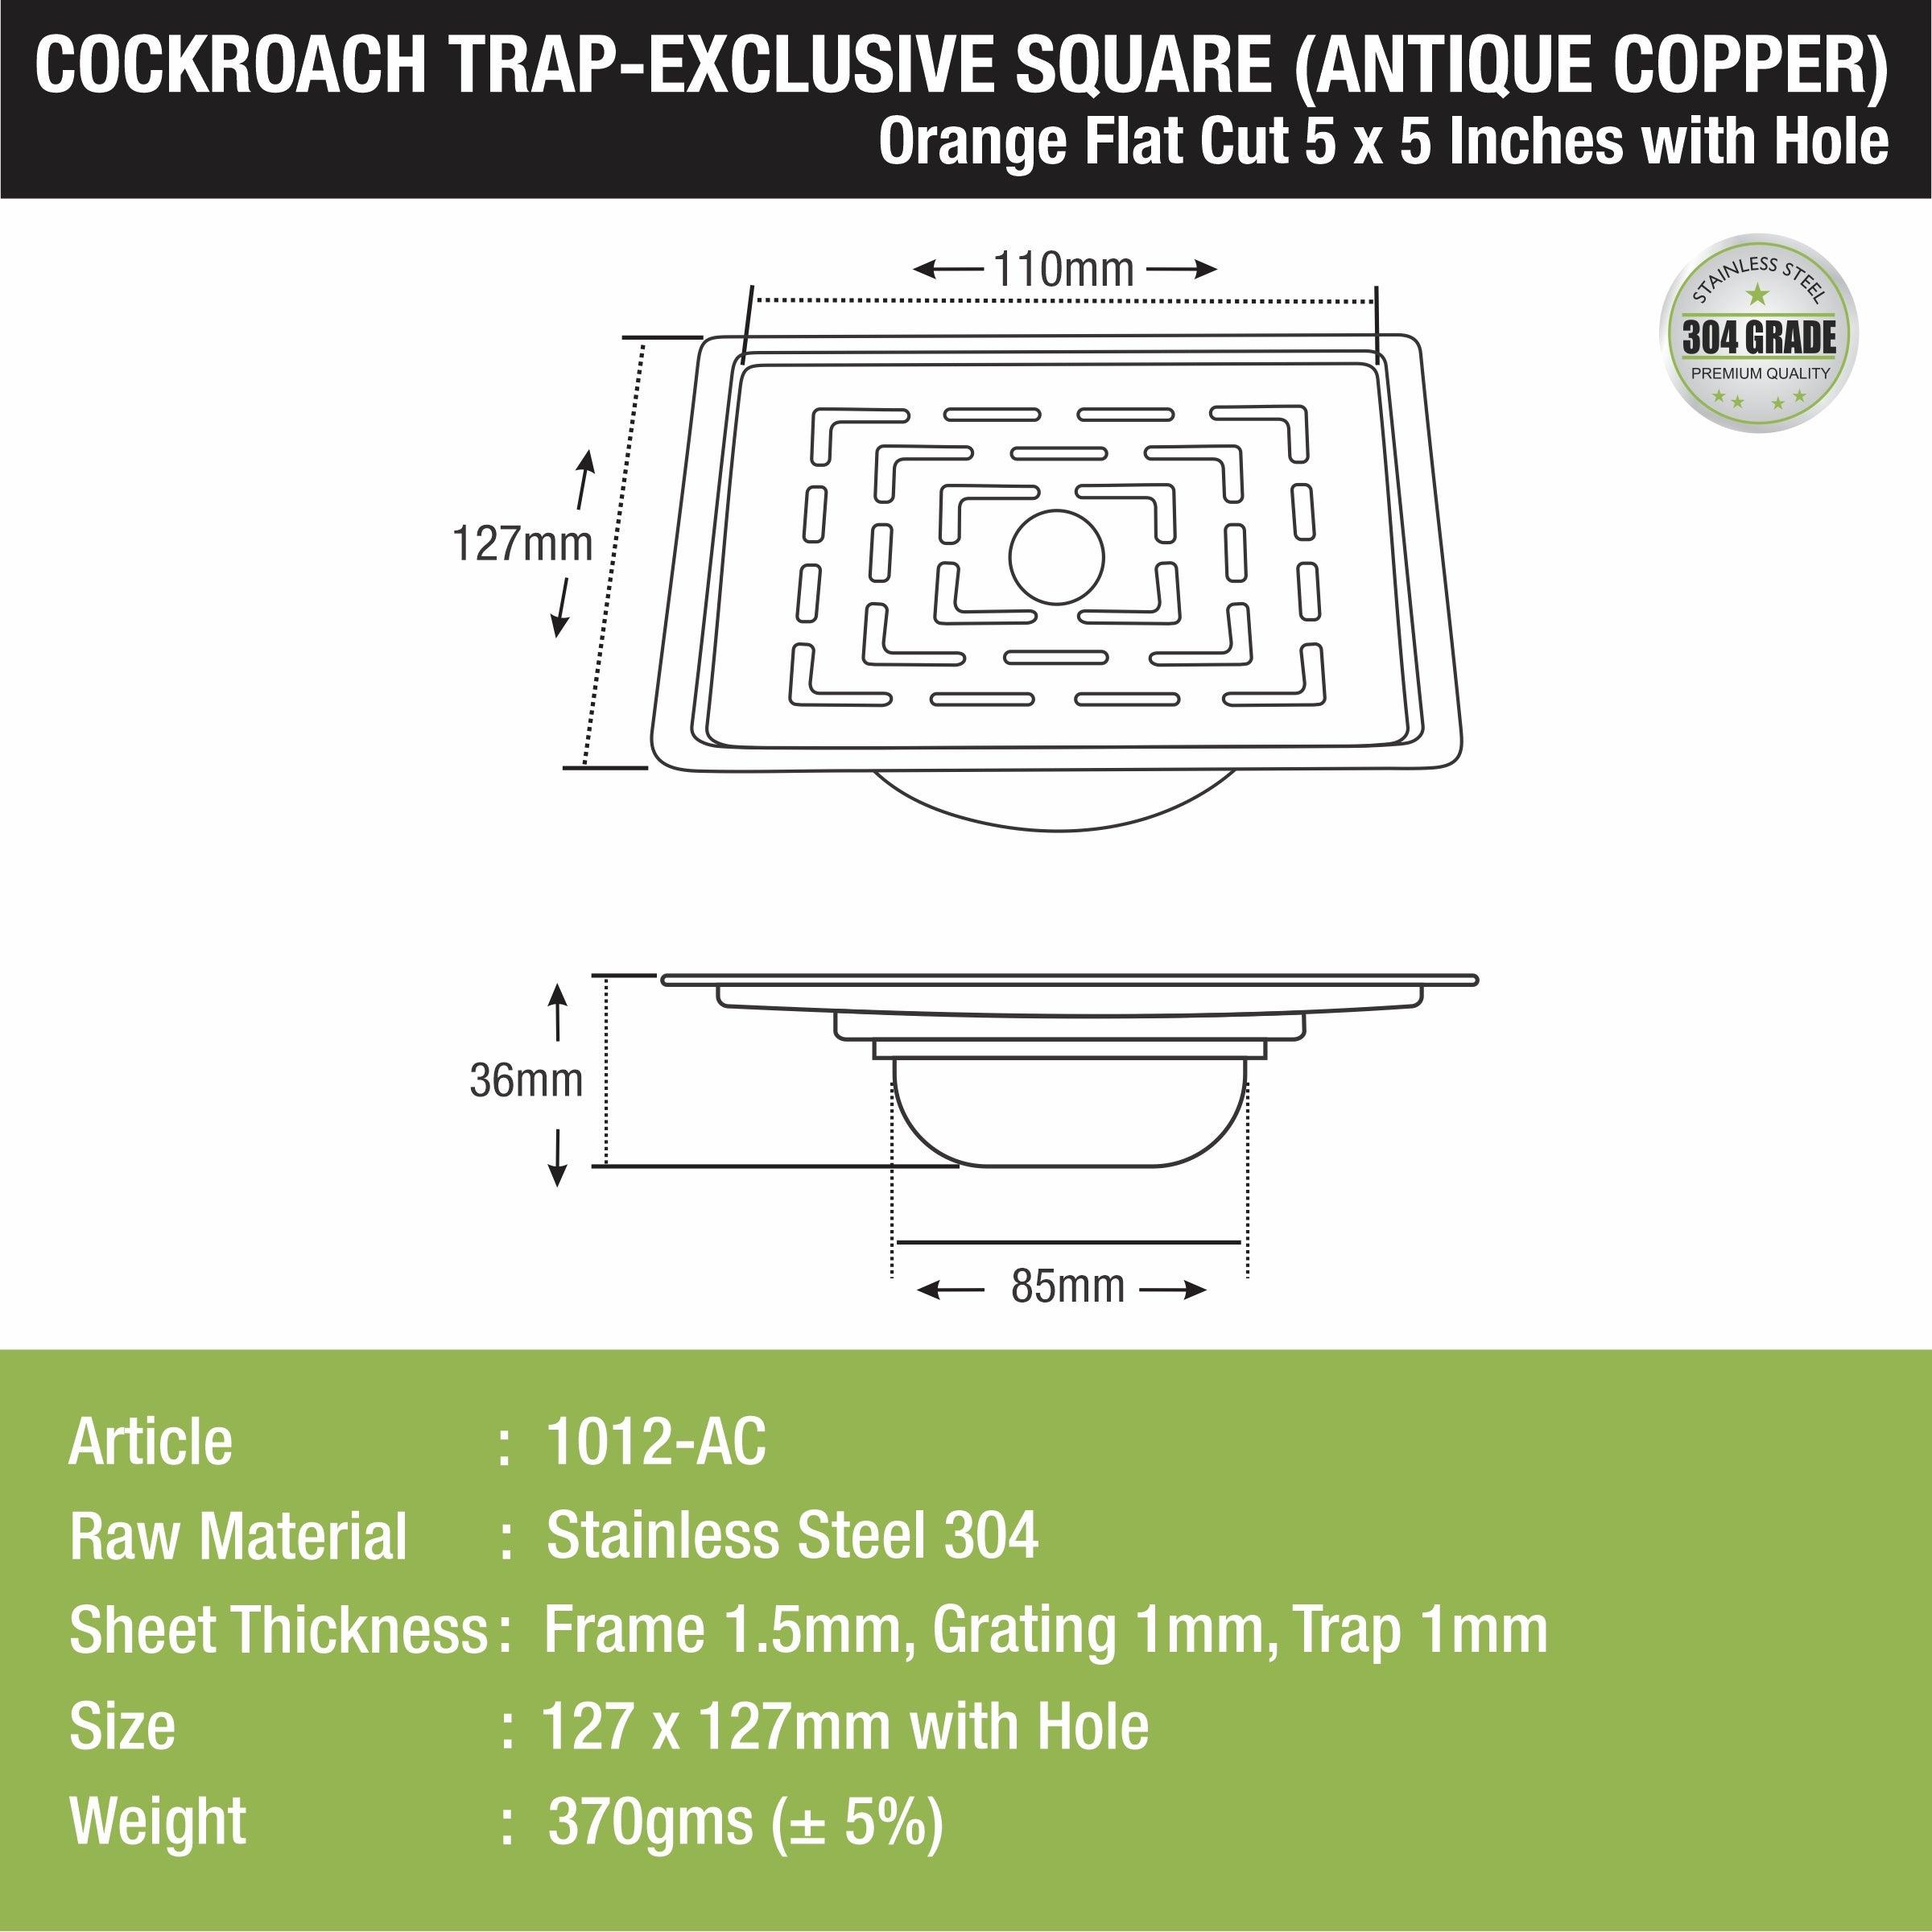 Orange Flat Cut Exclusive Square Floor Drain in Antique Copper PVD Coating (5 x 5 Inches) with Hole & Cockroach Trap sizes and dimensions